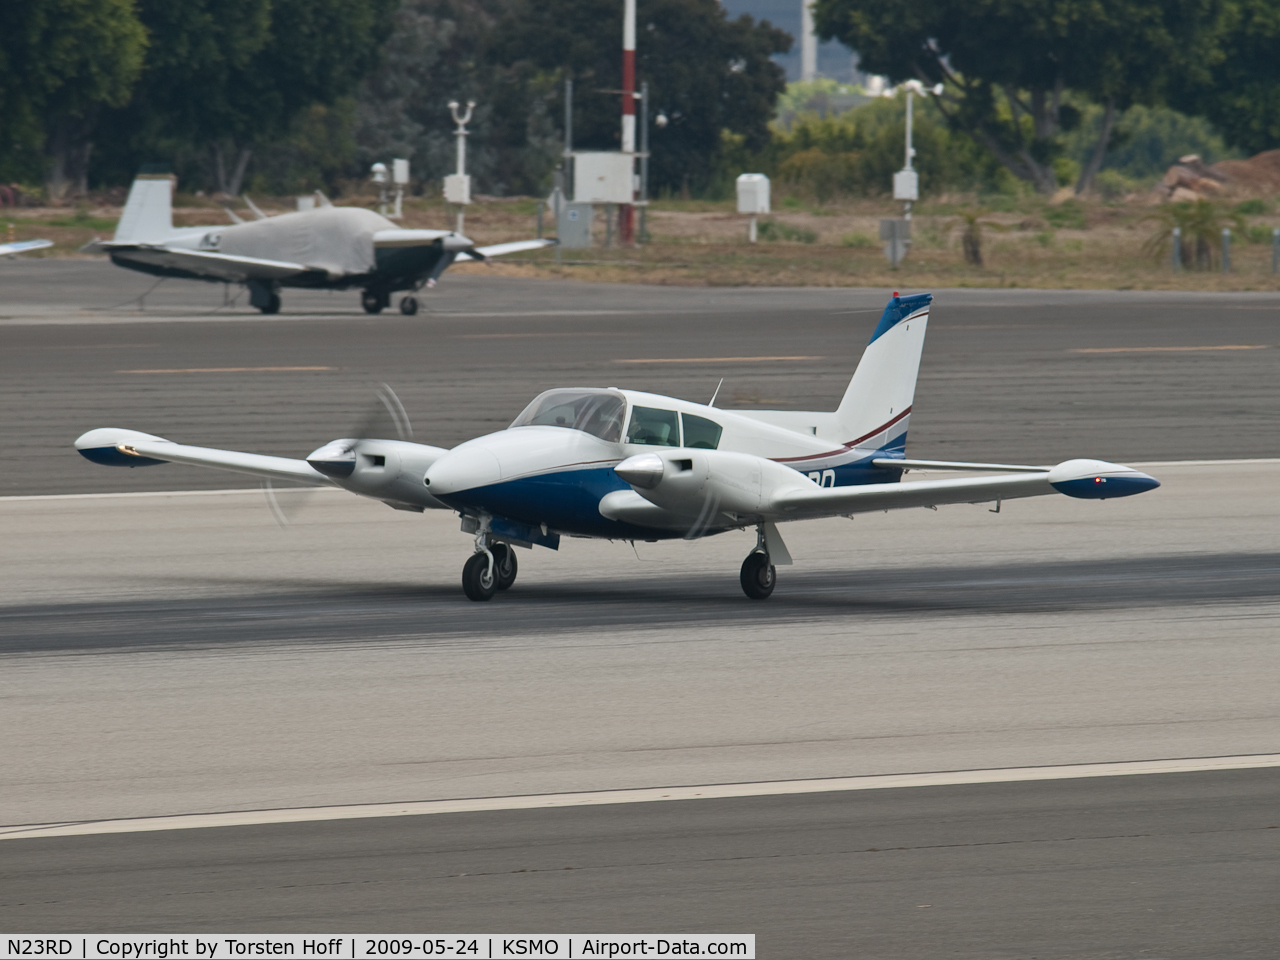 N23RD, Piper PA-30 Twin Comanche Twin Comanche C/N 30-469, N23RD departing from RWY 21